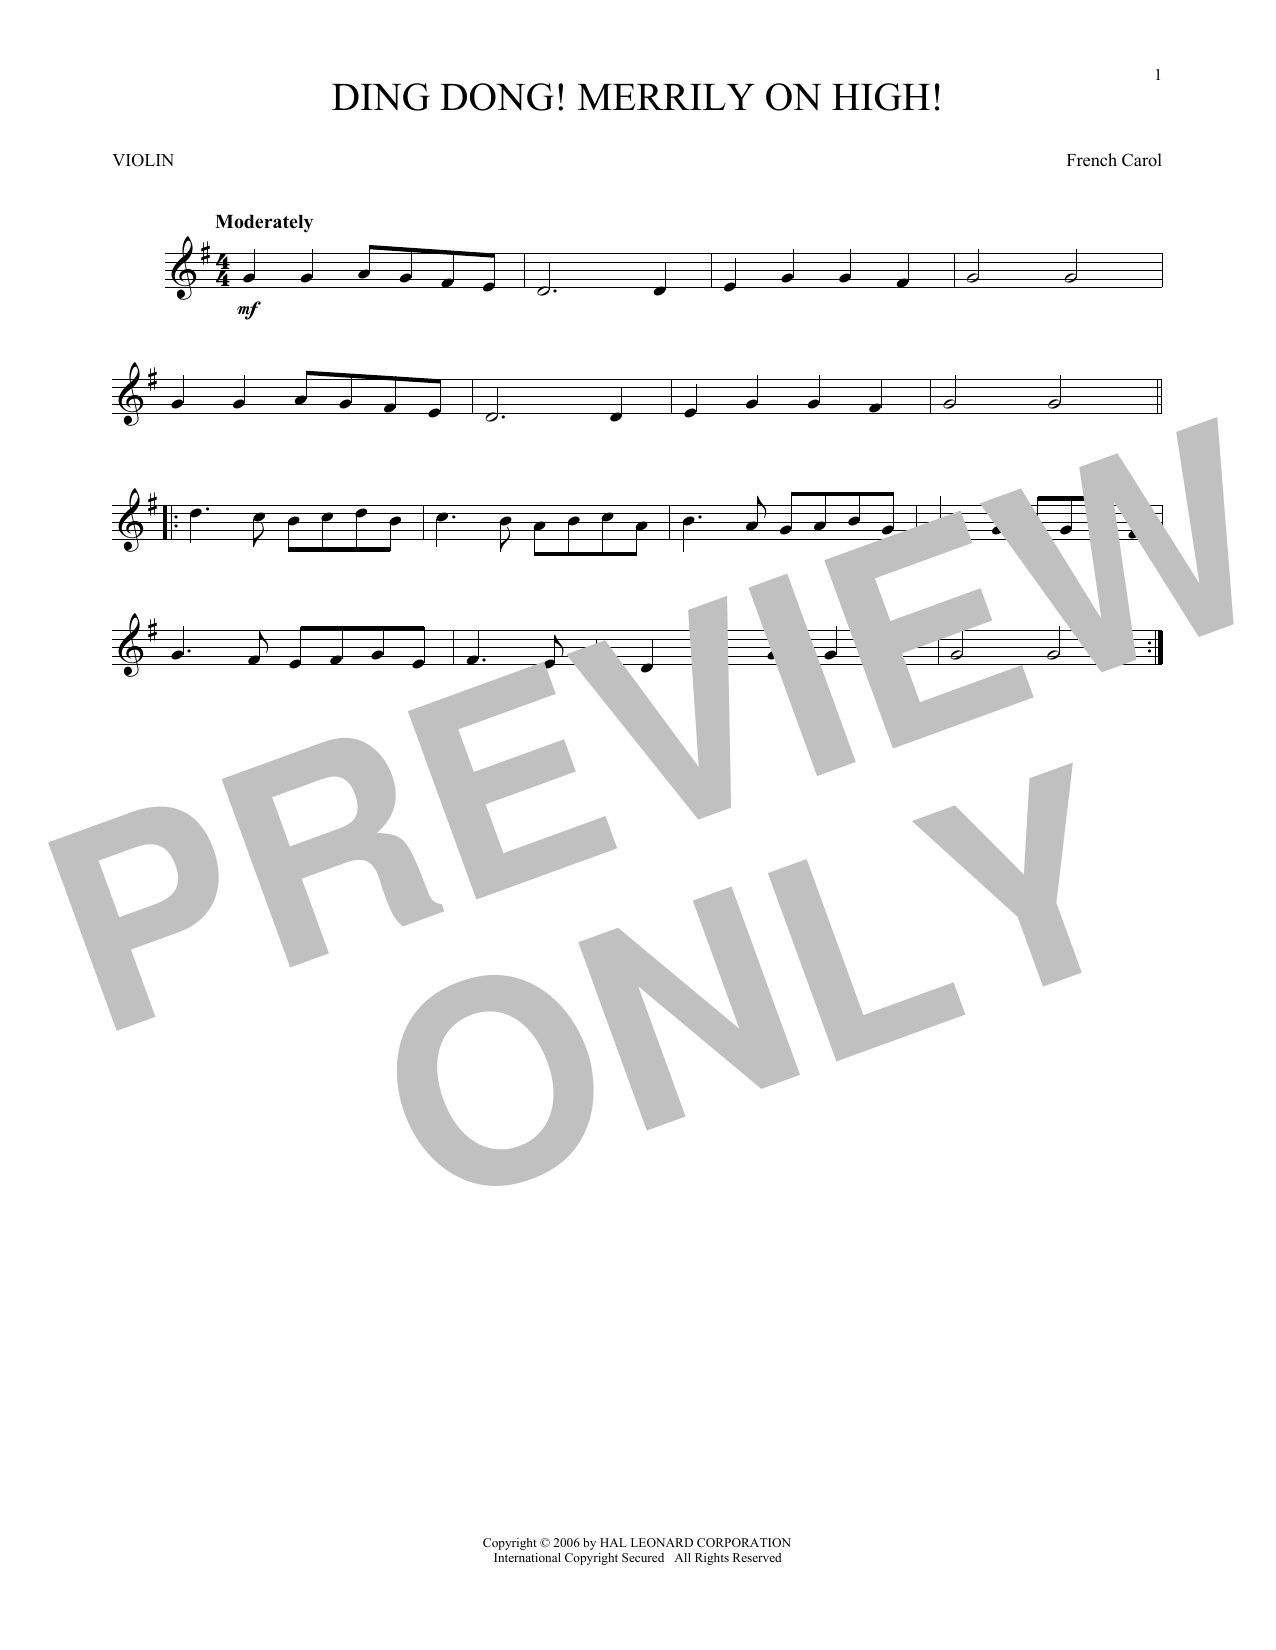 Download French Carol Ding Dong! Merrily On High! Sheet Music